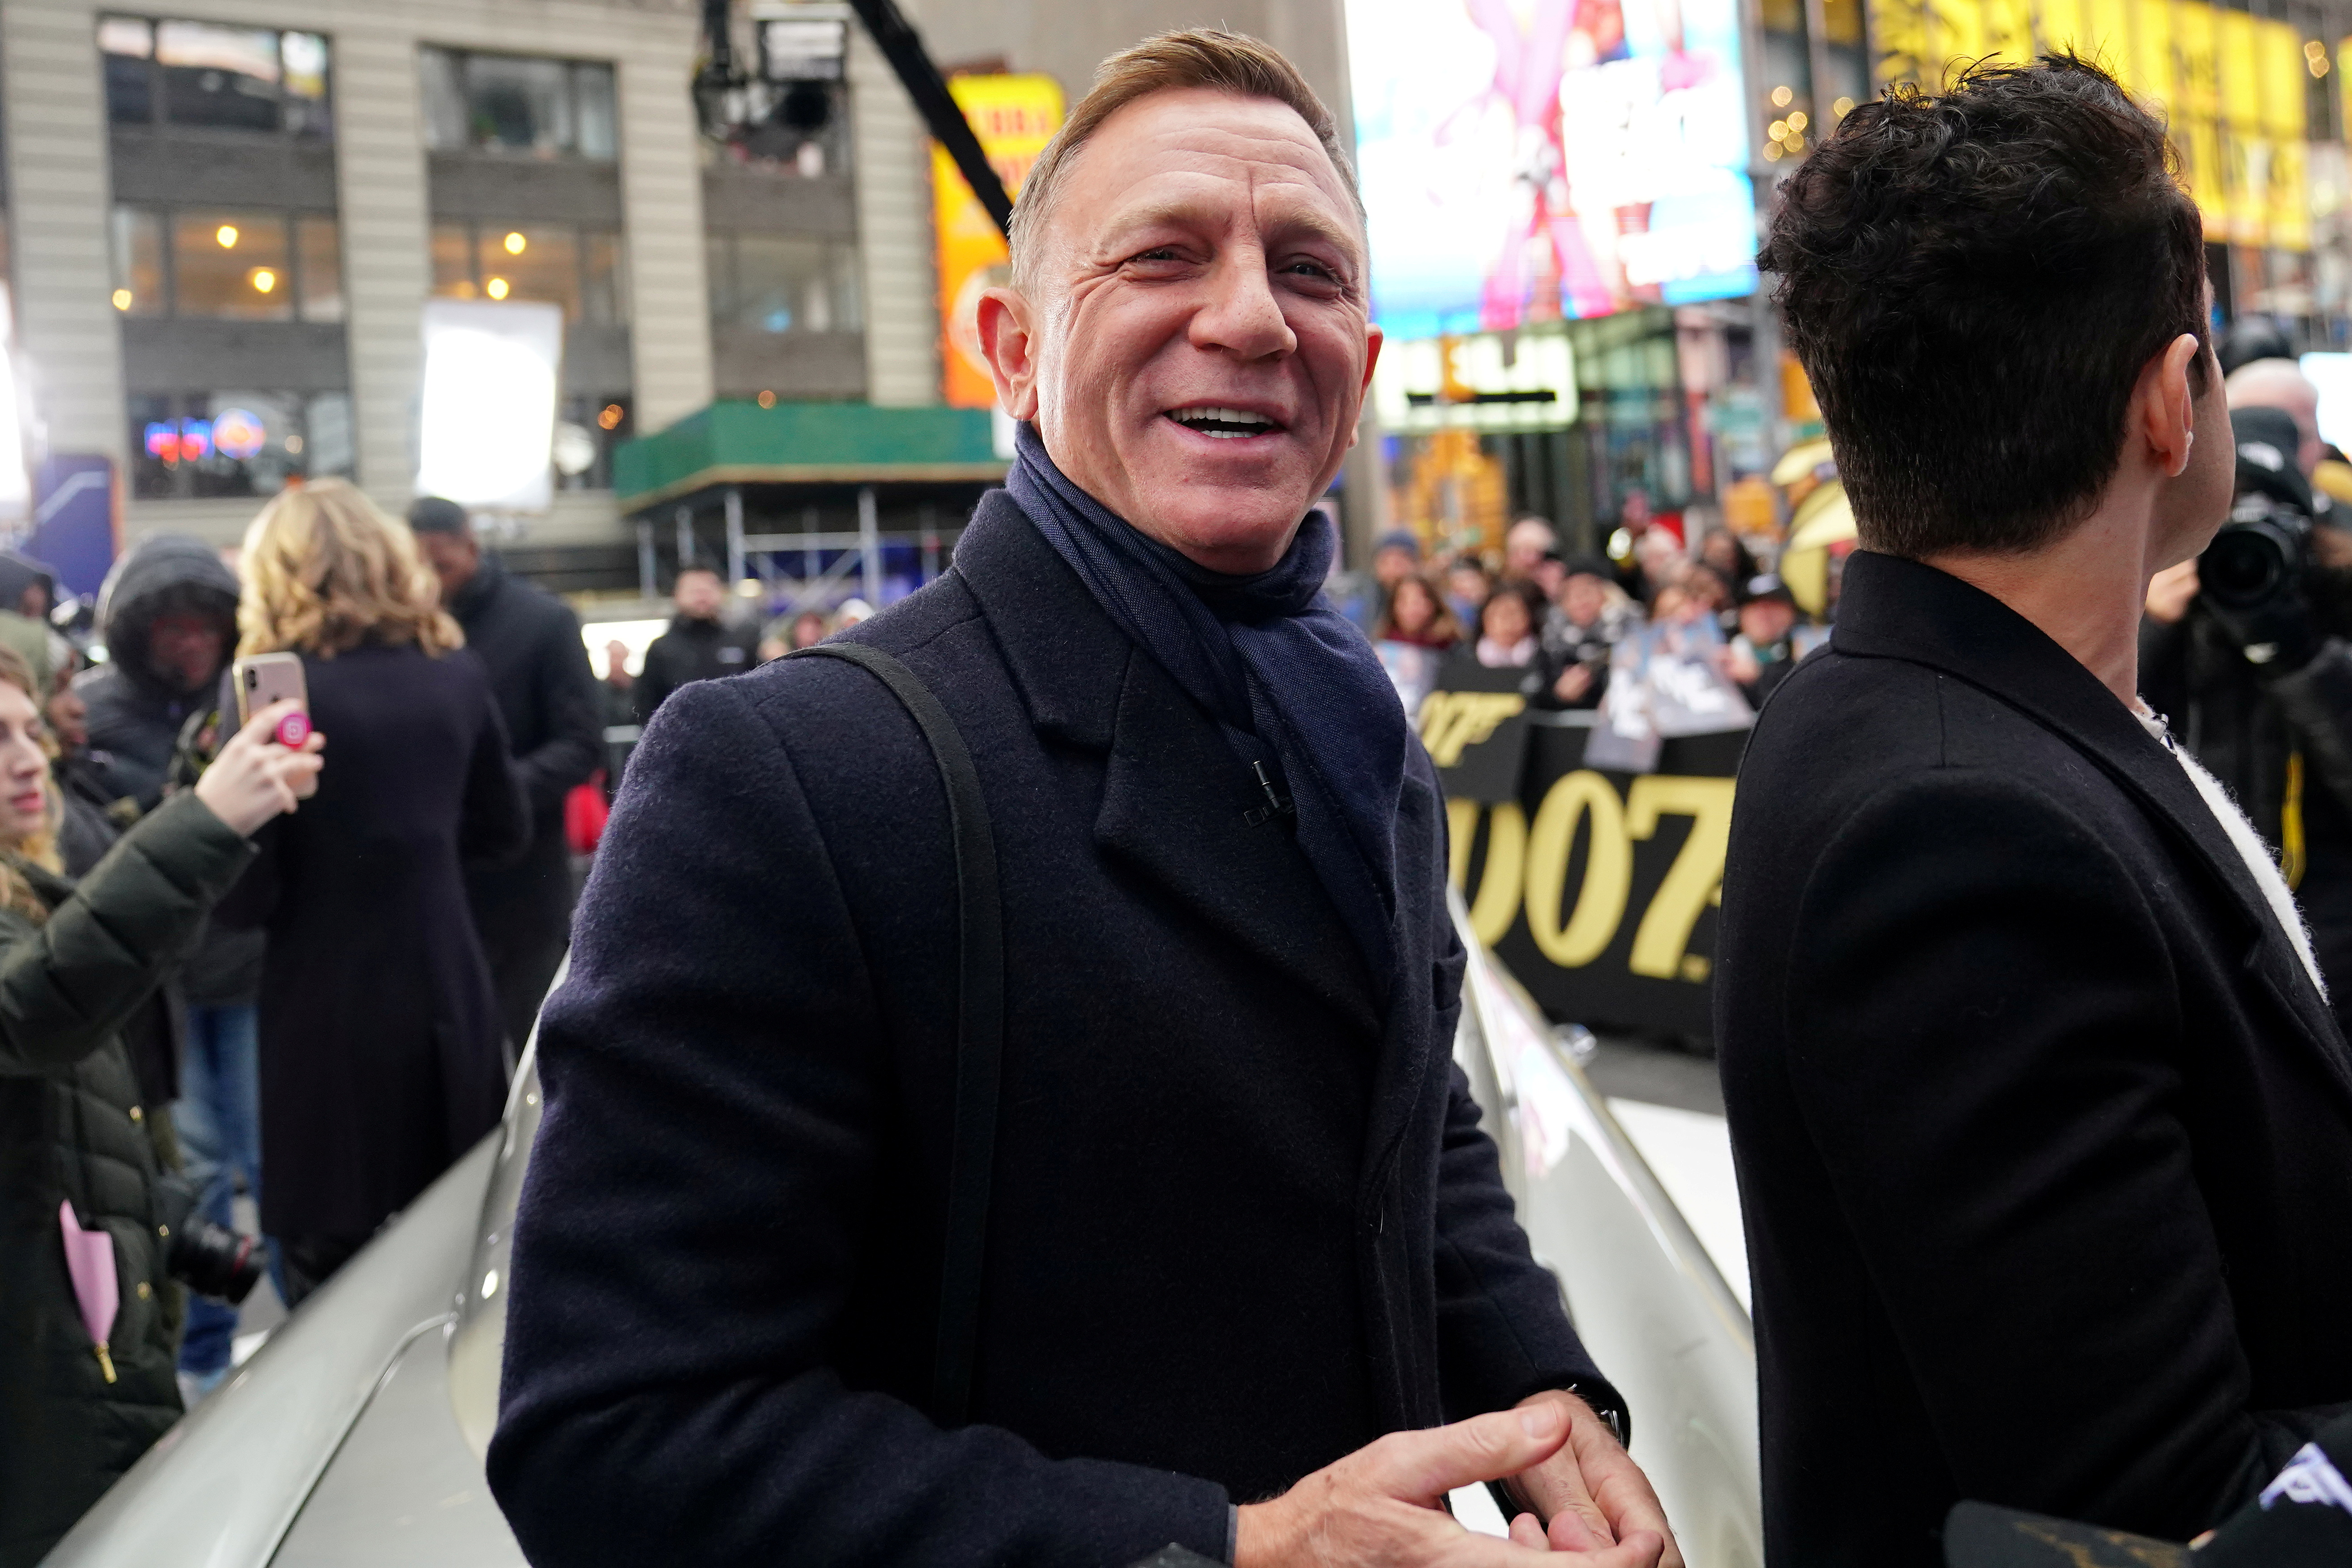 Actor Daniel Craig reacts next to actor Rami Malek during a promotional appearance on TV in Times Square for the new James Bond movie 